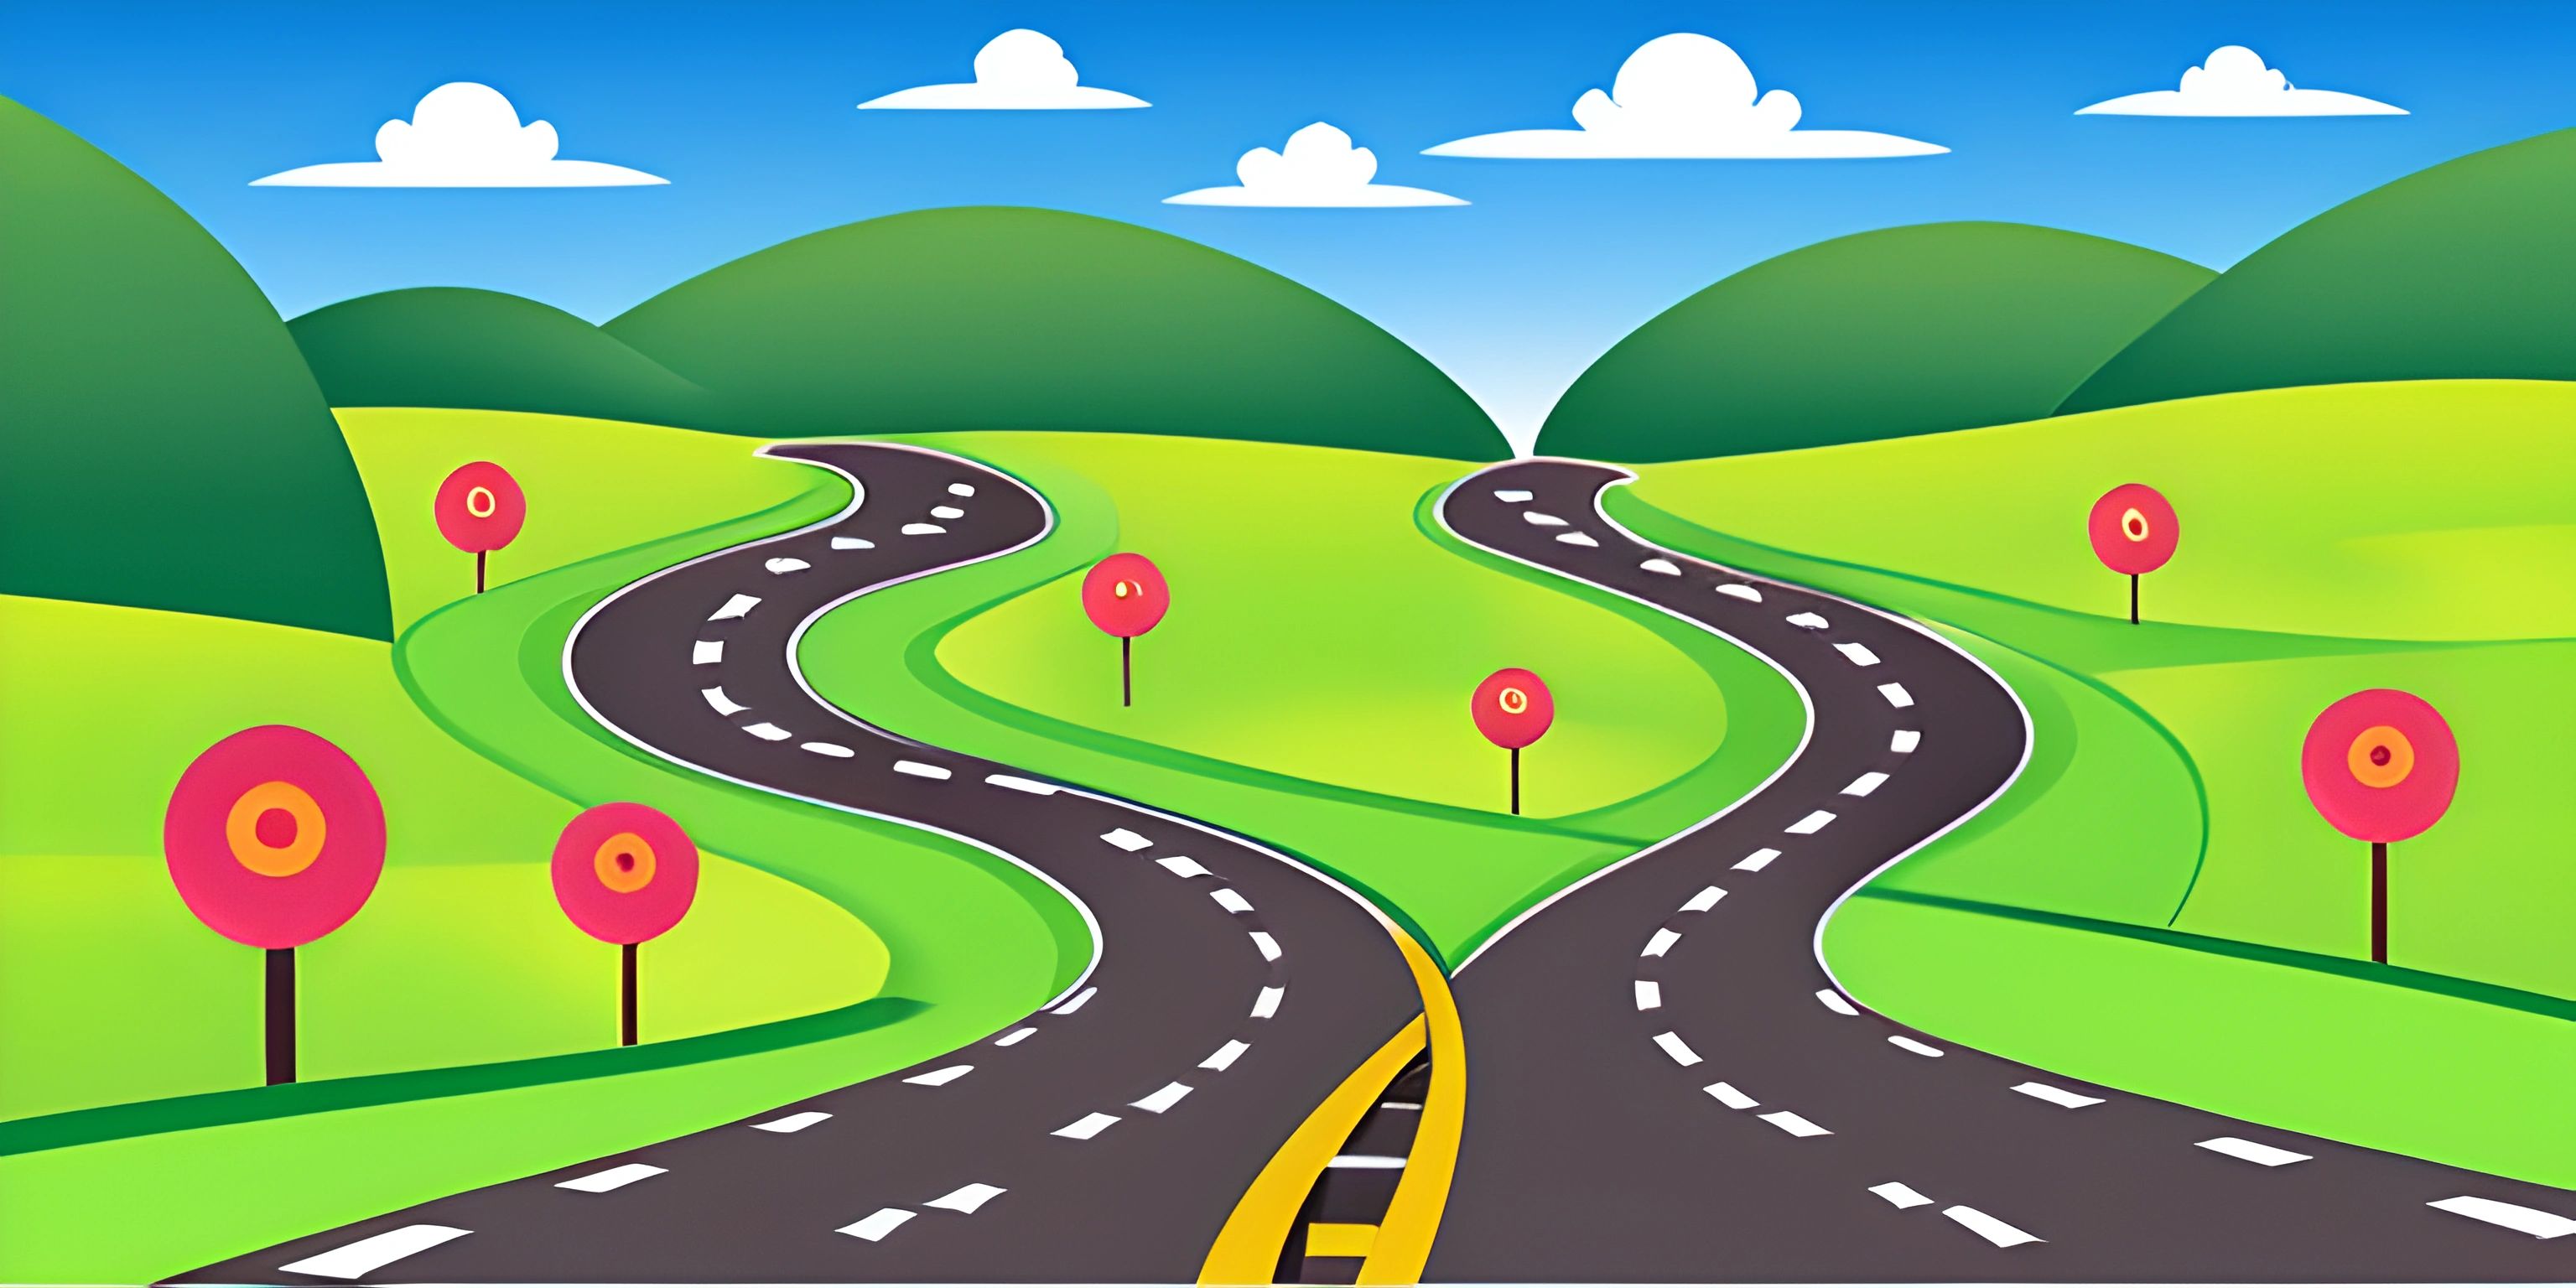 a cartoon scene of a winding road with traffic signs and trees on each side of it